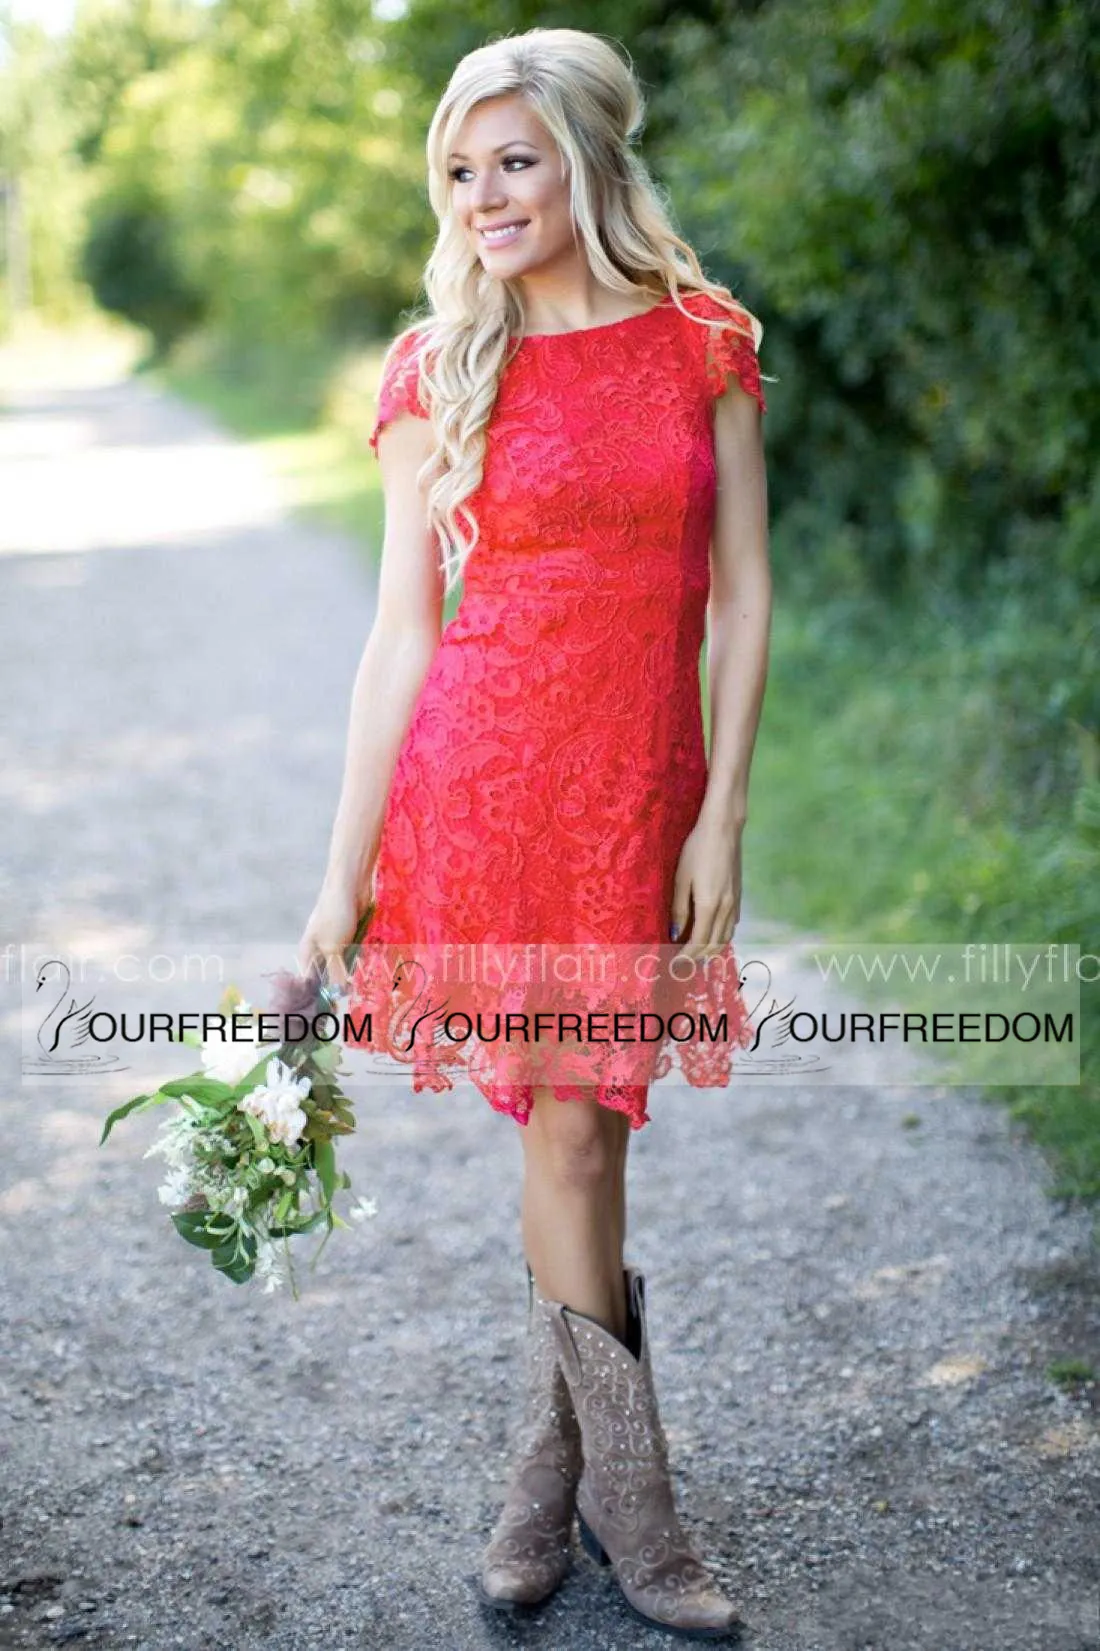 Red Full Lace Short Bridesmaid Dresses Cheap Western Country Style Crew Neck Cap Sleeves Mini Backless Homecoming Cocktail Dresses1749736